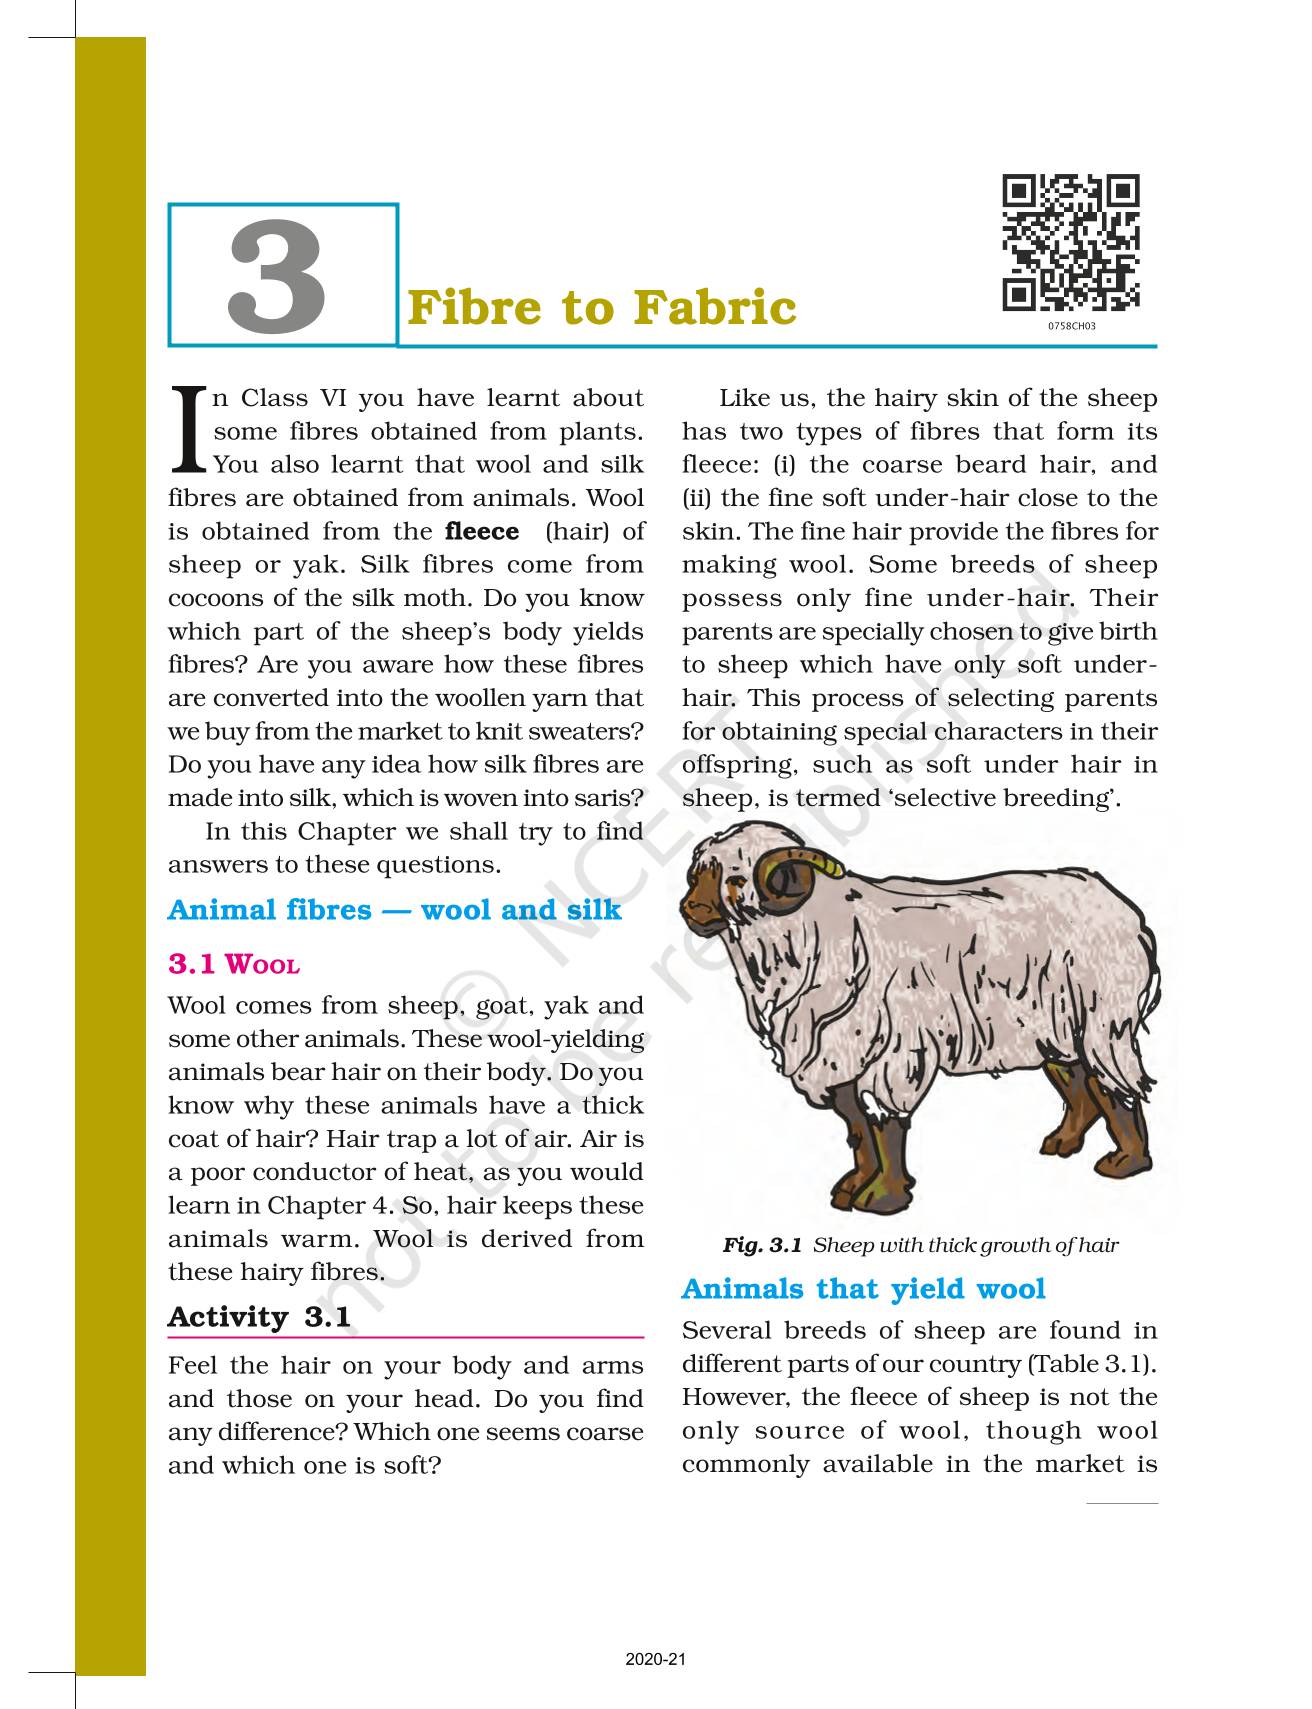 Fibre To Fabric - NCERT Book of Class 7 Science